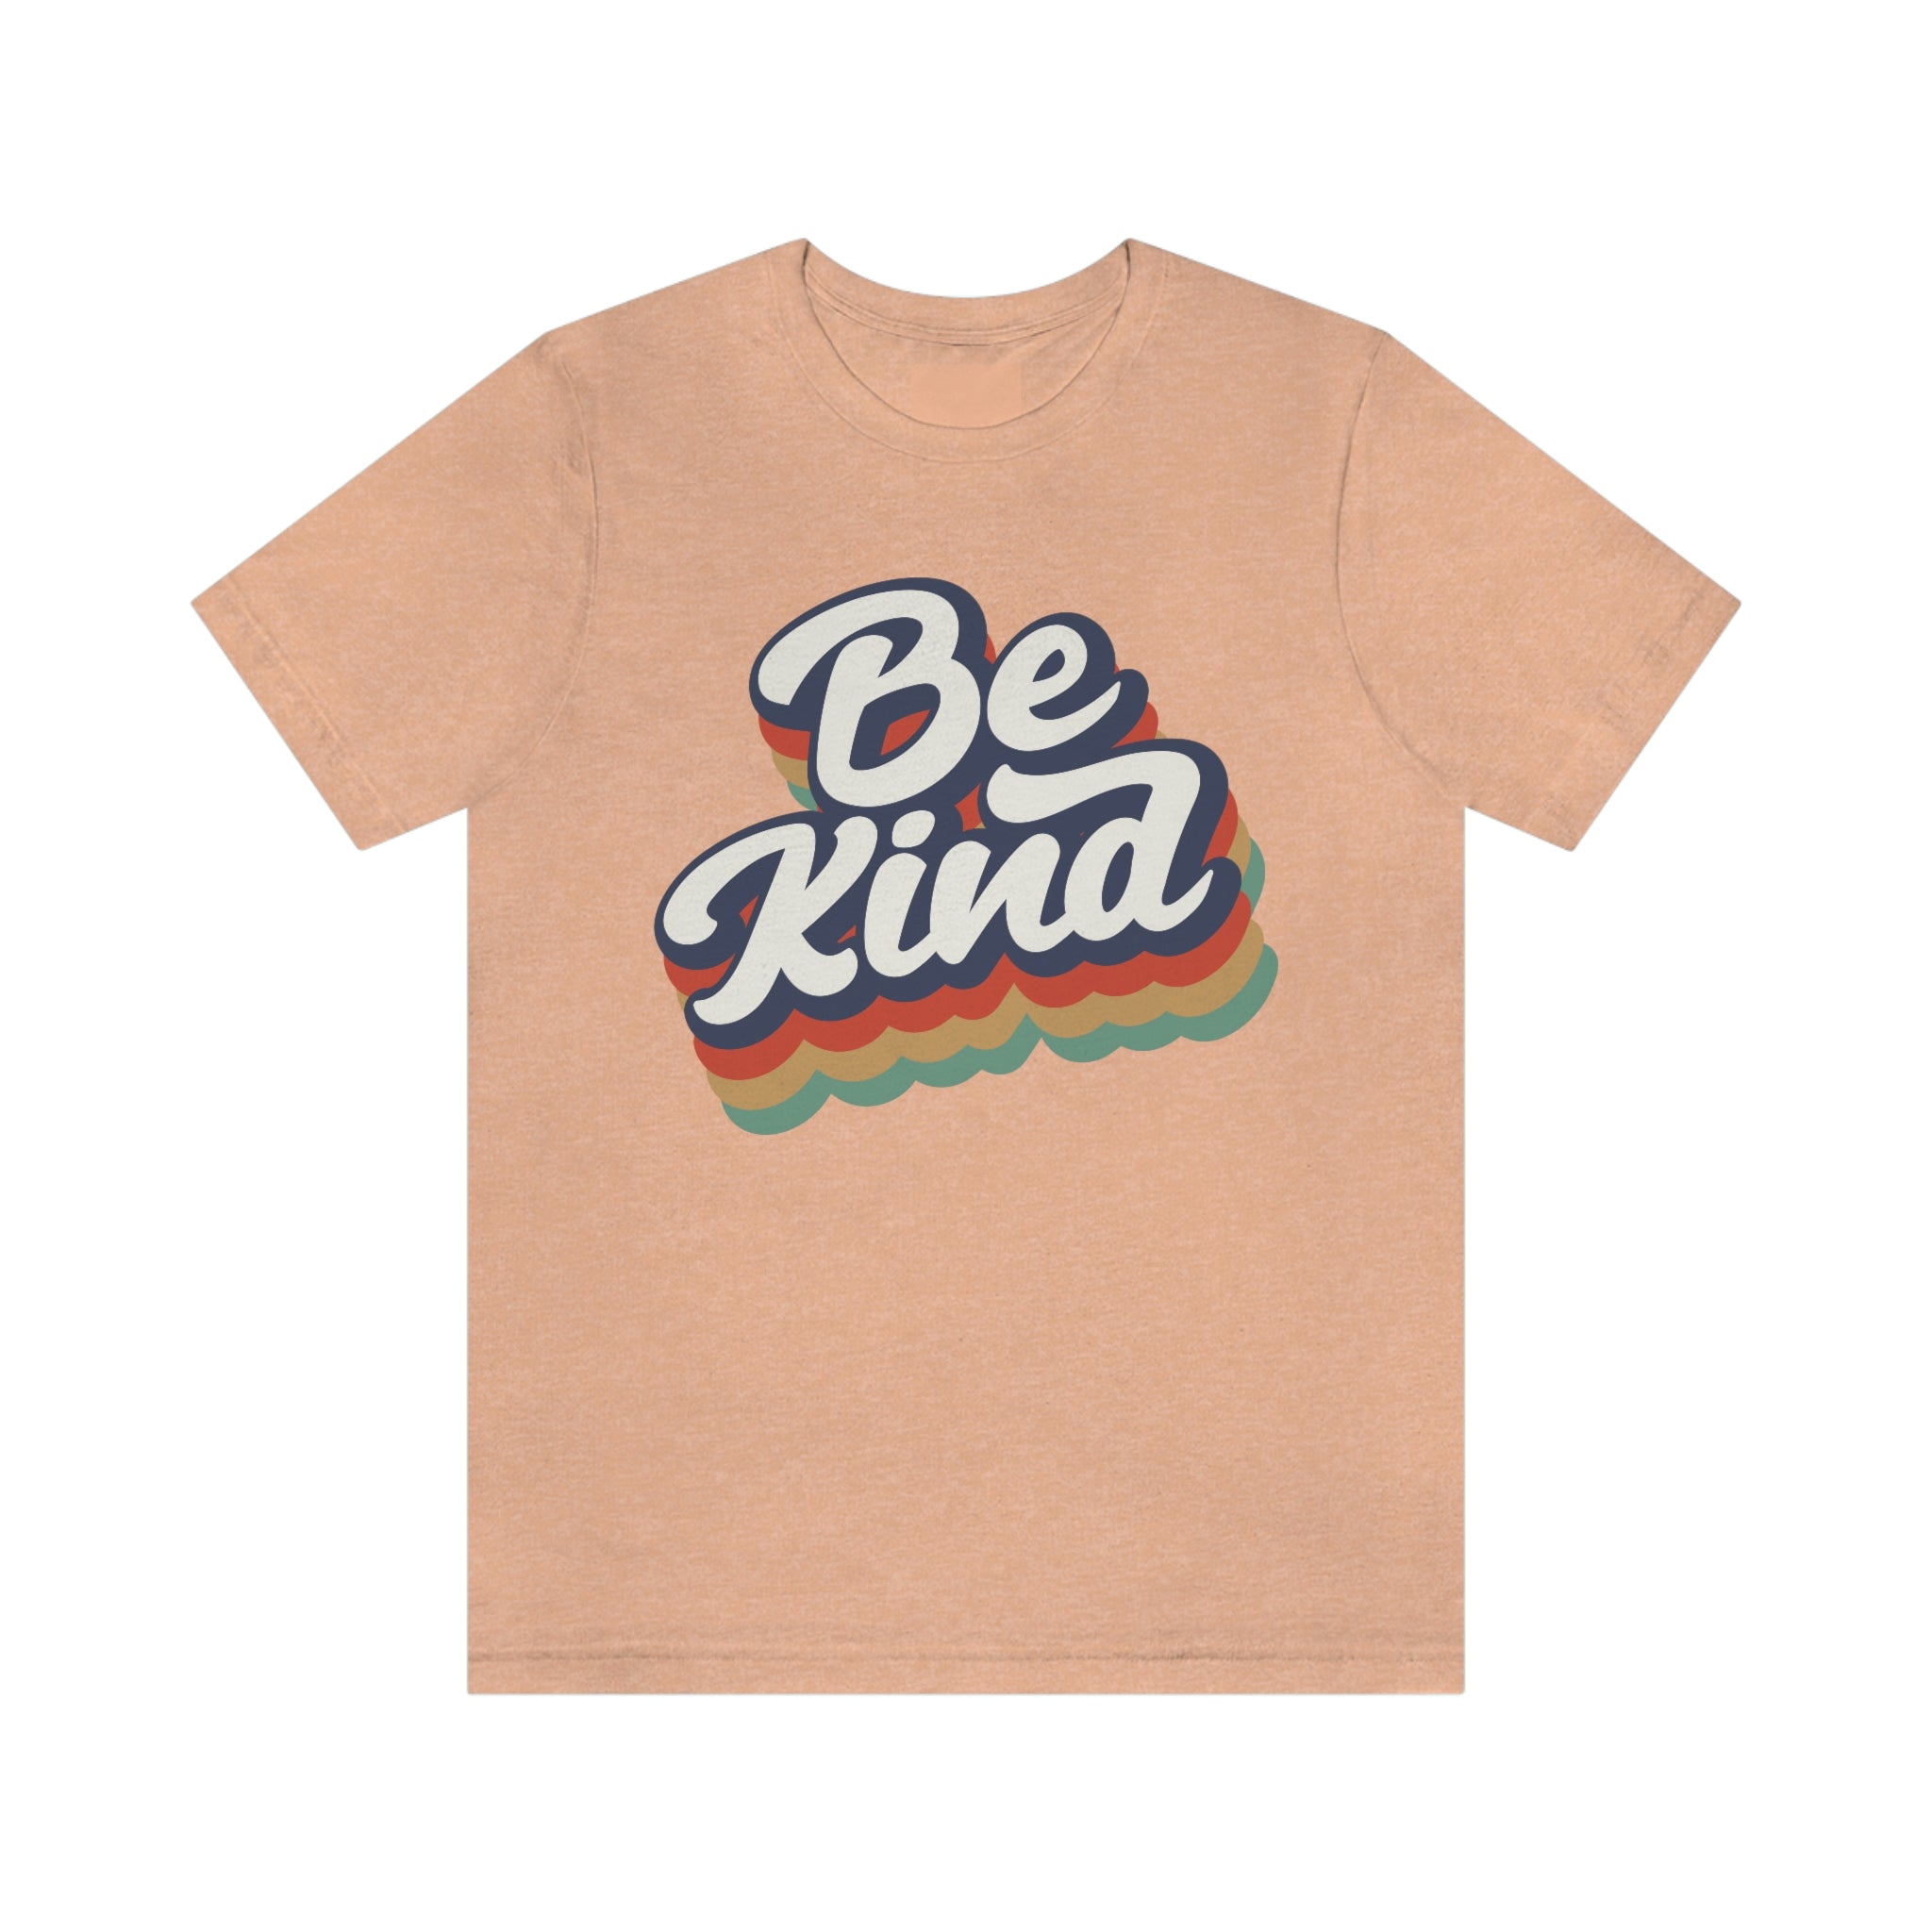 Kindness In The Front - Be Kind : Unisex 100% Premium Comfy Cotton, T-Shirt by Bella+Canvas